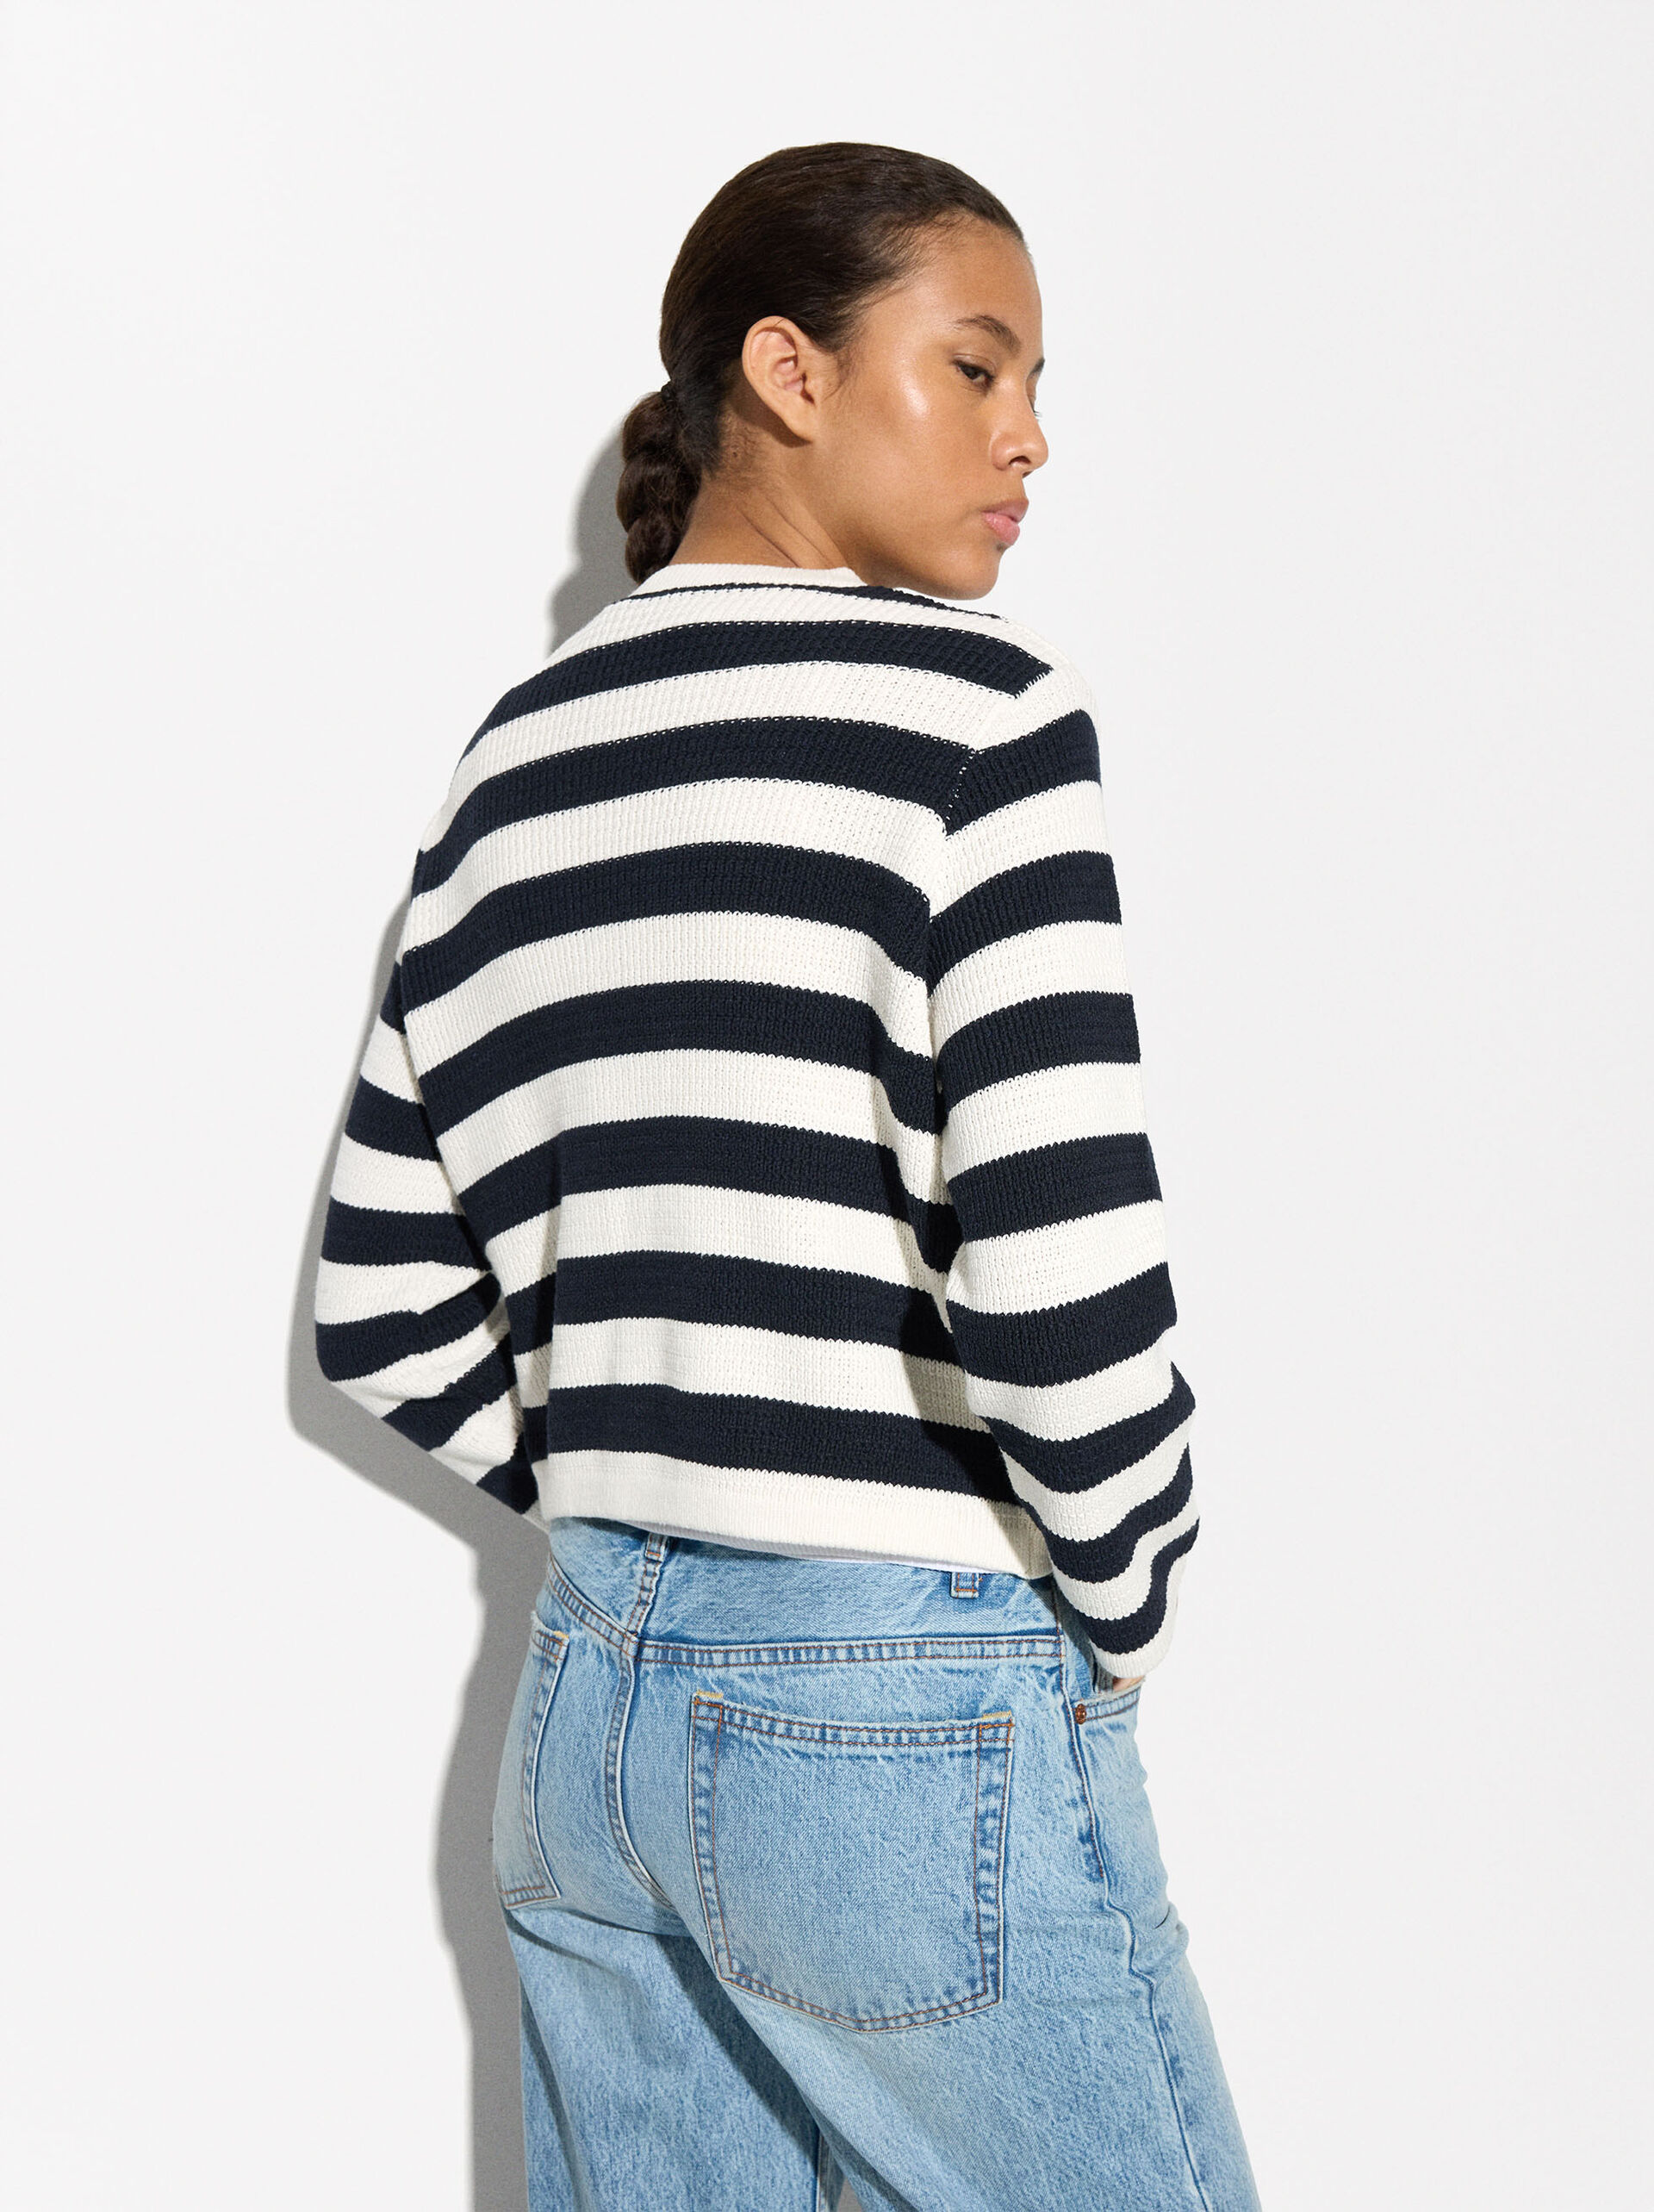 Striped Knitted Cardigan  image number 3.0